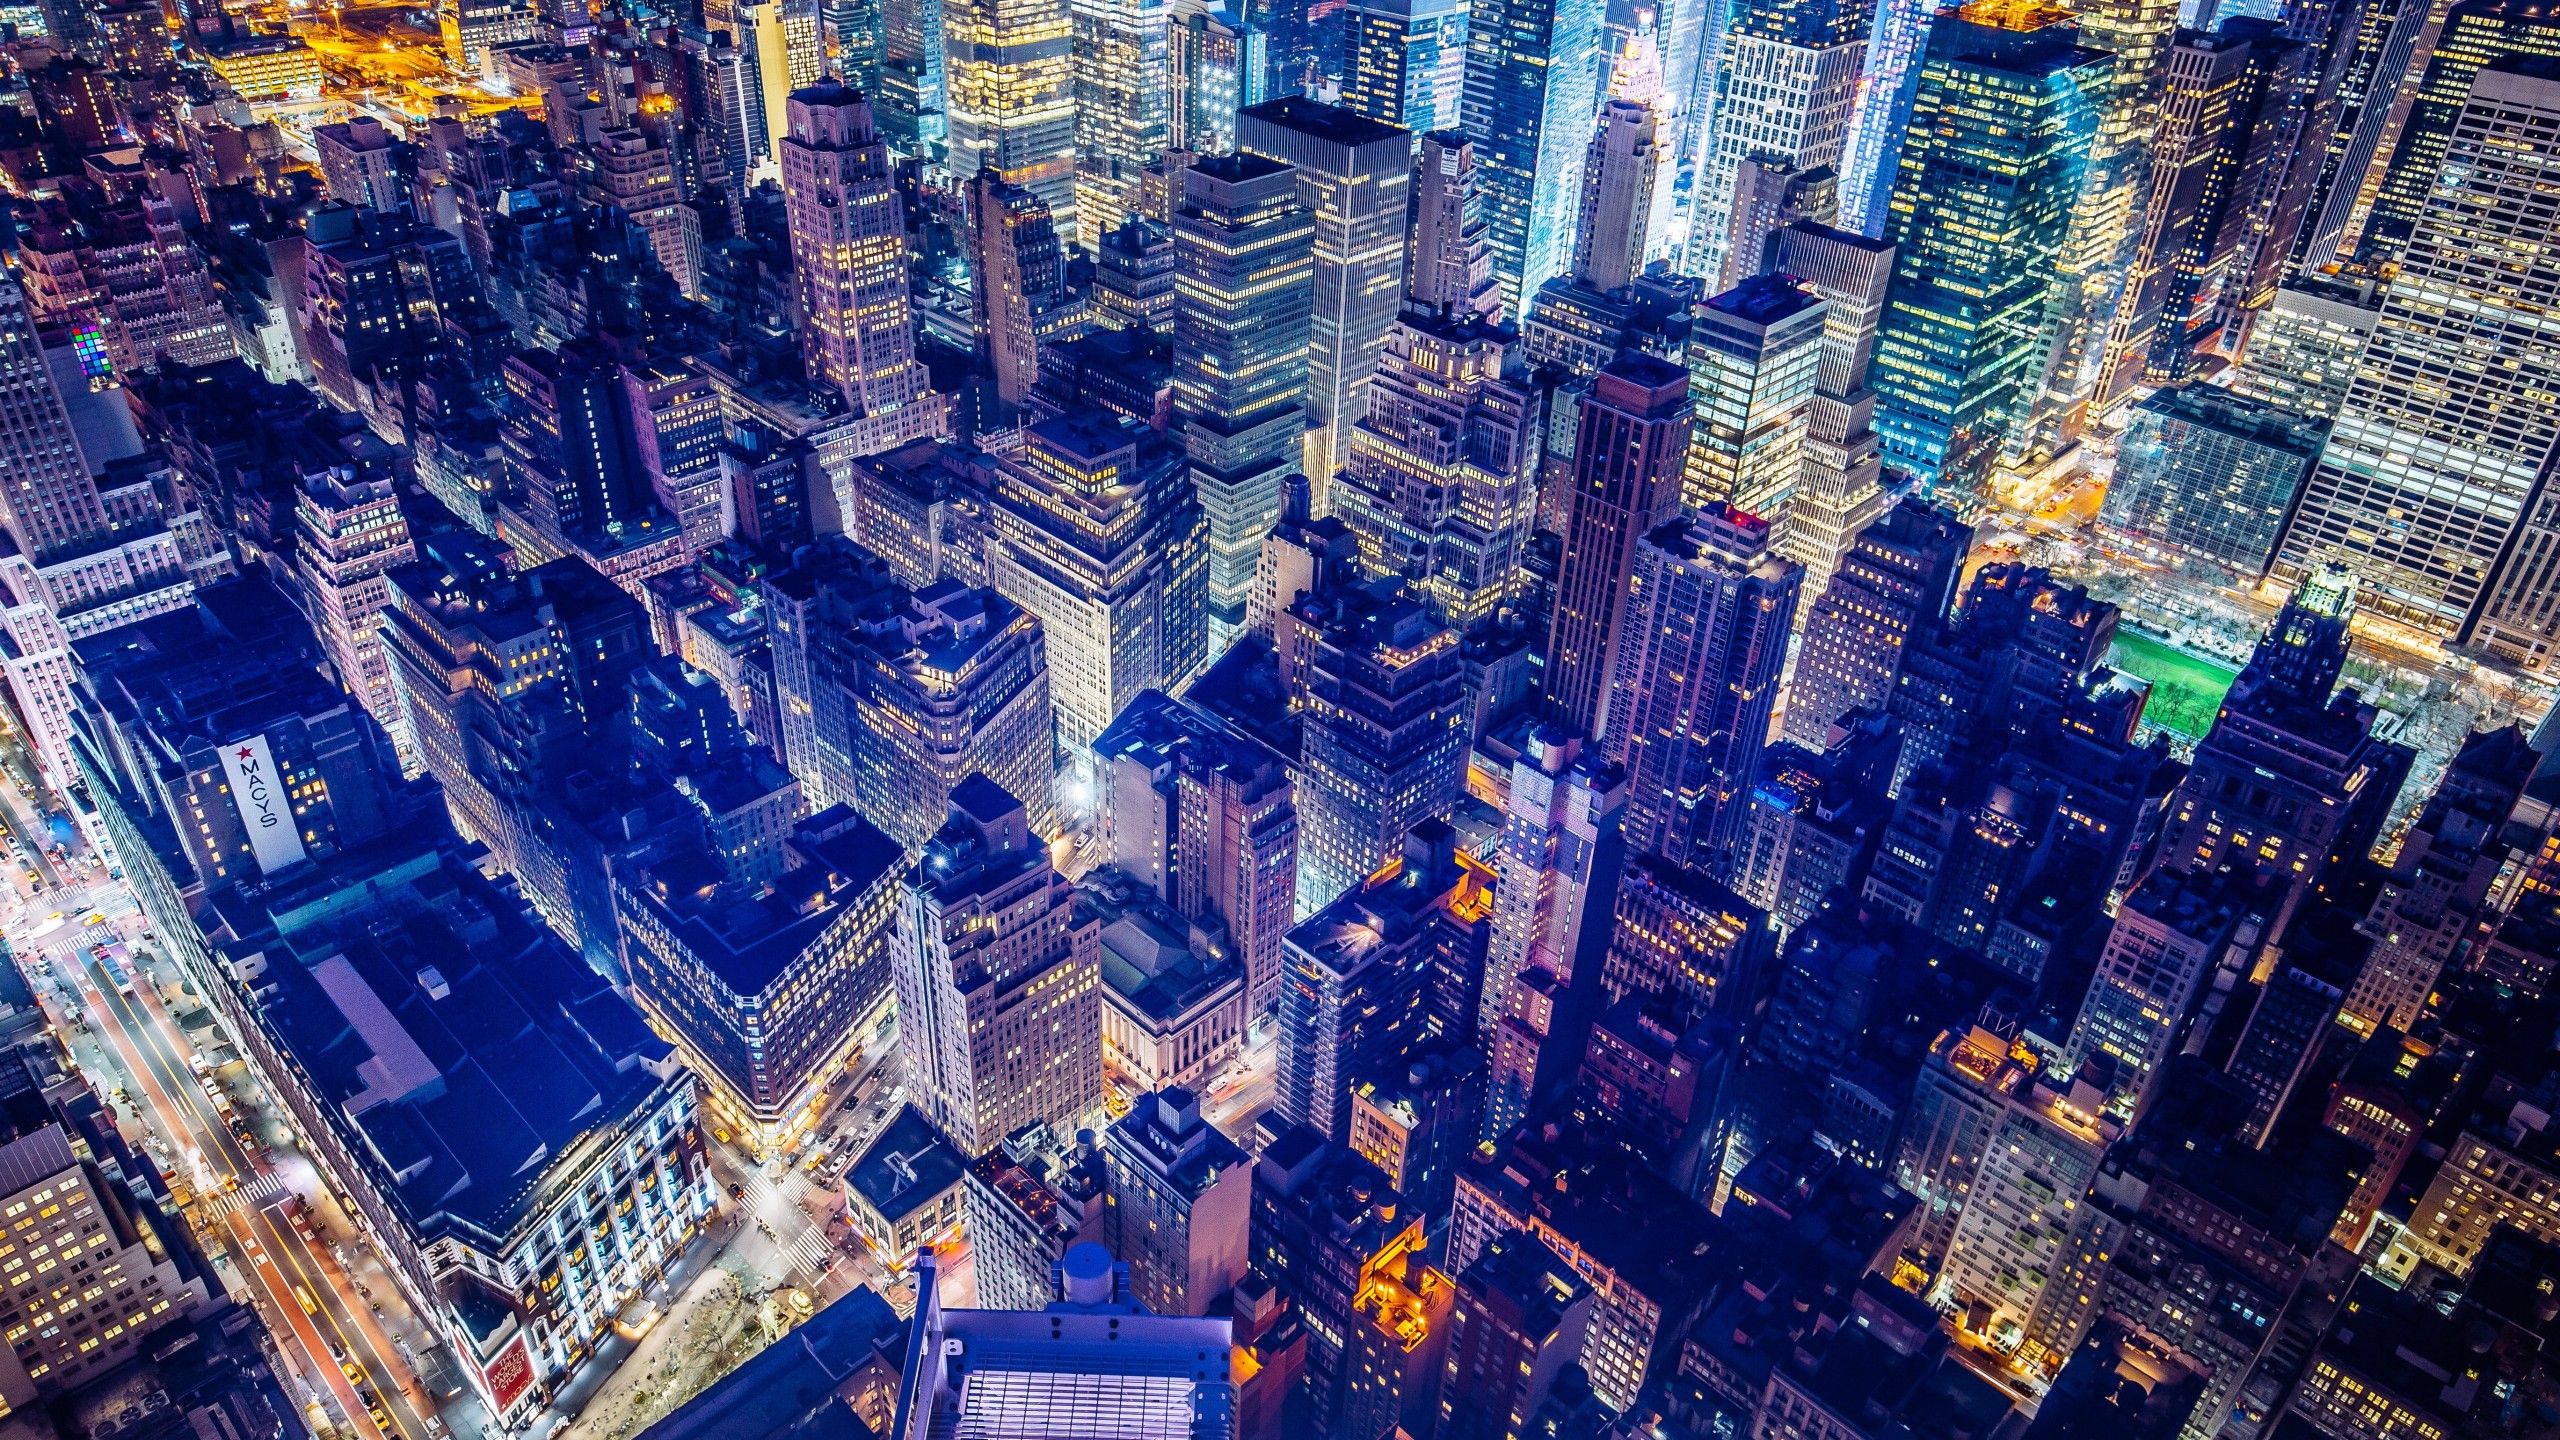 New York City 4K Wallpaper, Aerial View, Cityscape, Nightscape, Night time, City lights, Skyscrapers, World